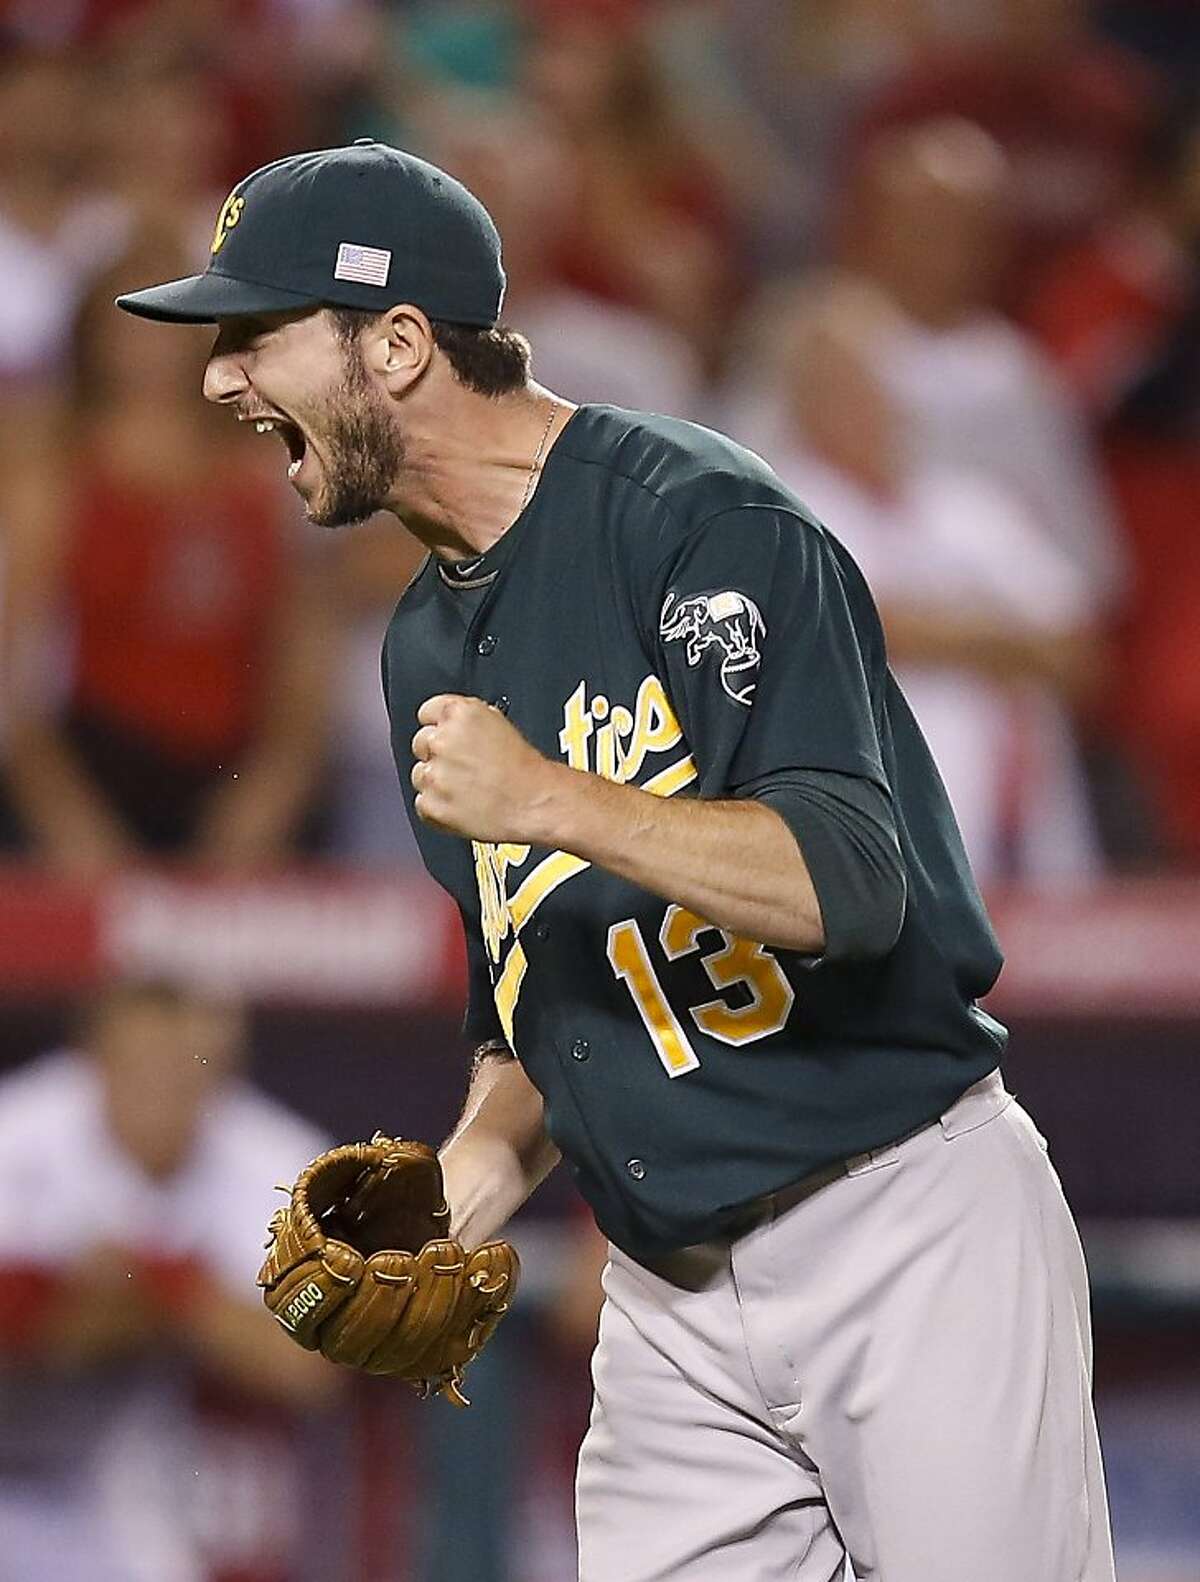 Oakland Athletics relief pitcher Jerry Blevins celebrates his team's 6-5 win against the Los Angeles Angels after a baseball game in Anaheim, Calif., Tuesday, Sept. 11, 2012. (AP Photo/Jae C. Hong)